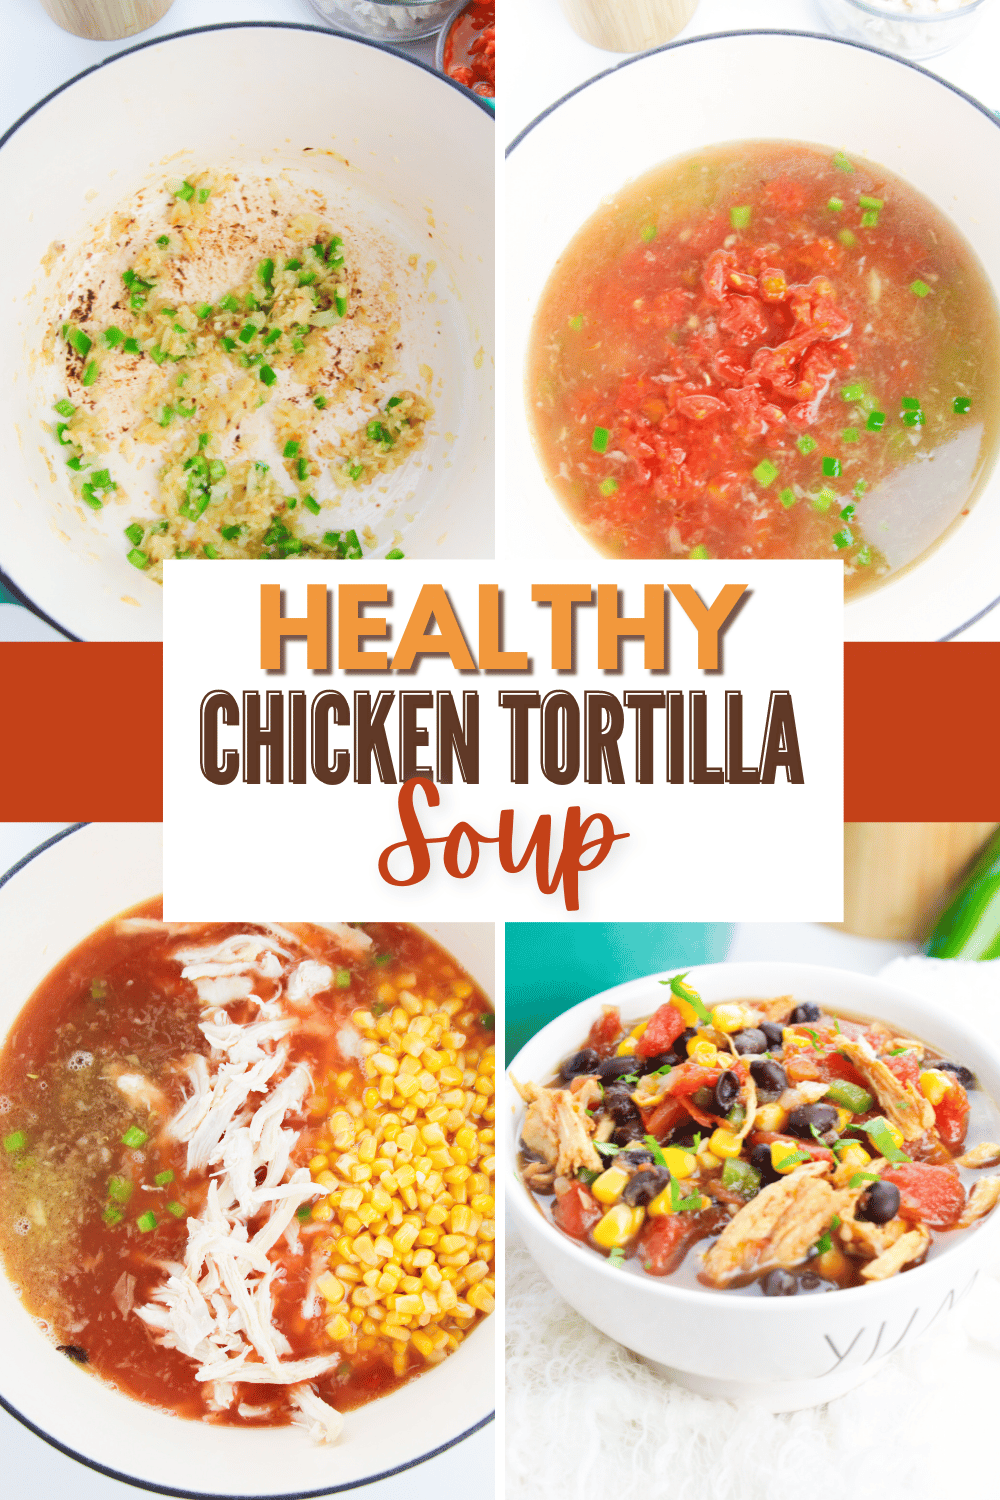 This delicious healthy chicken tortilla soup is bursting with flavor and is perfect for fall. Plus, it’s easy to make, and budget-friendly! #healthychickentortillasoup #chickentortillasoup #chicken #tortillasoup #soup via @wondermomwannab